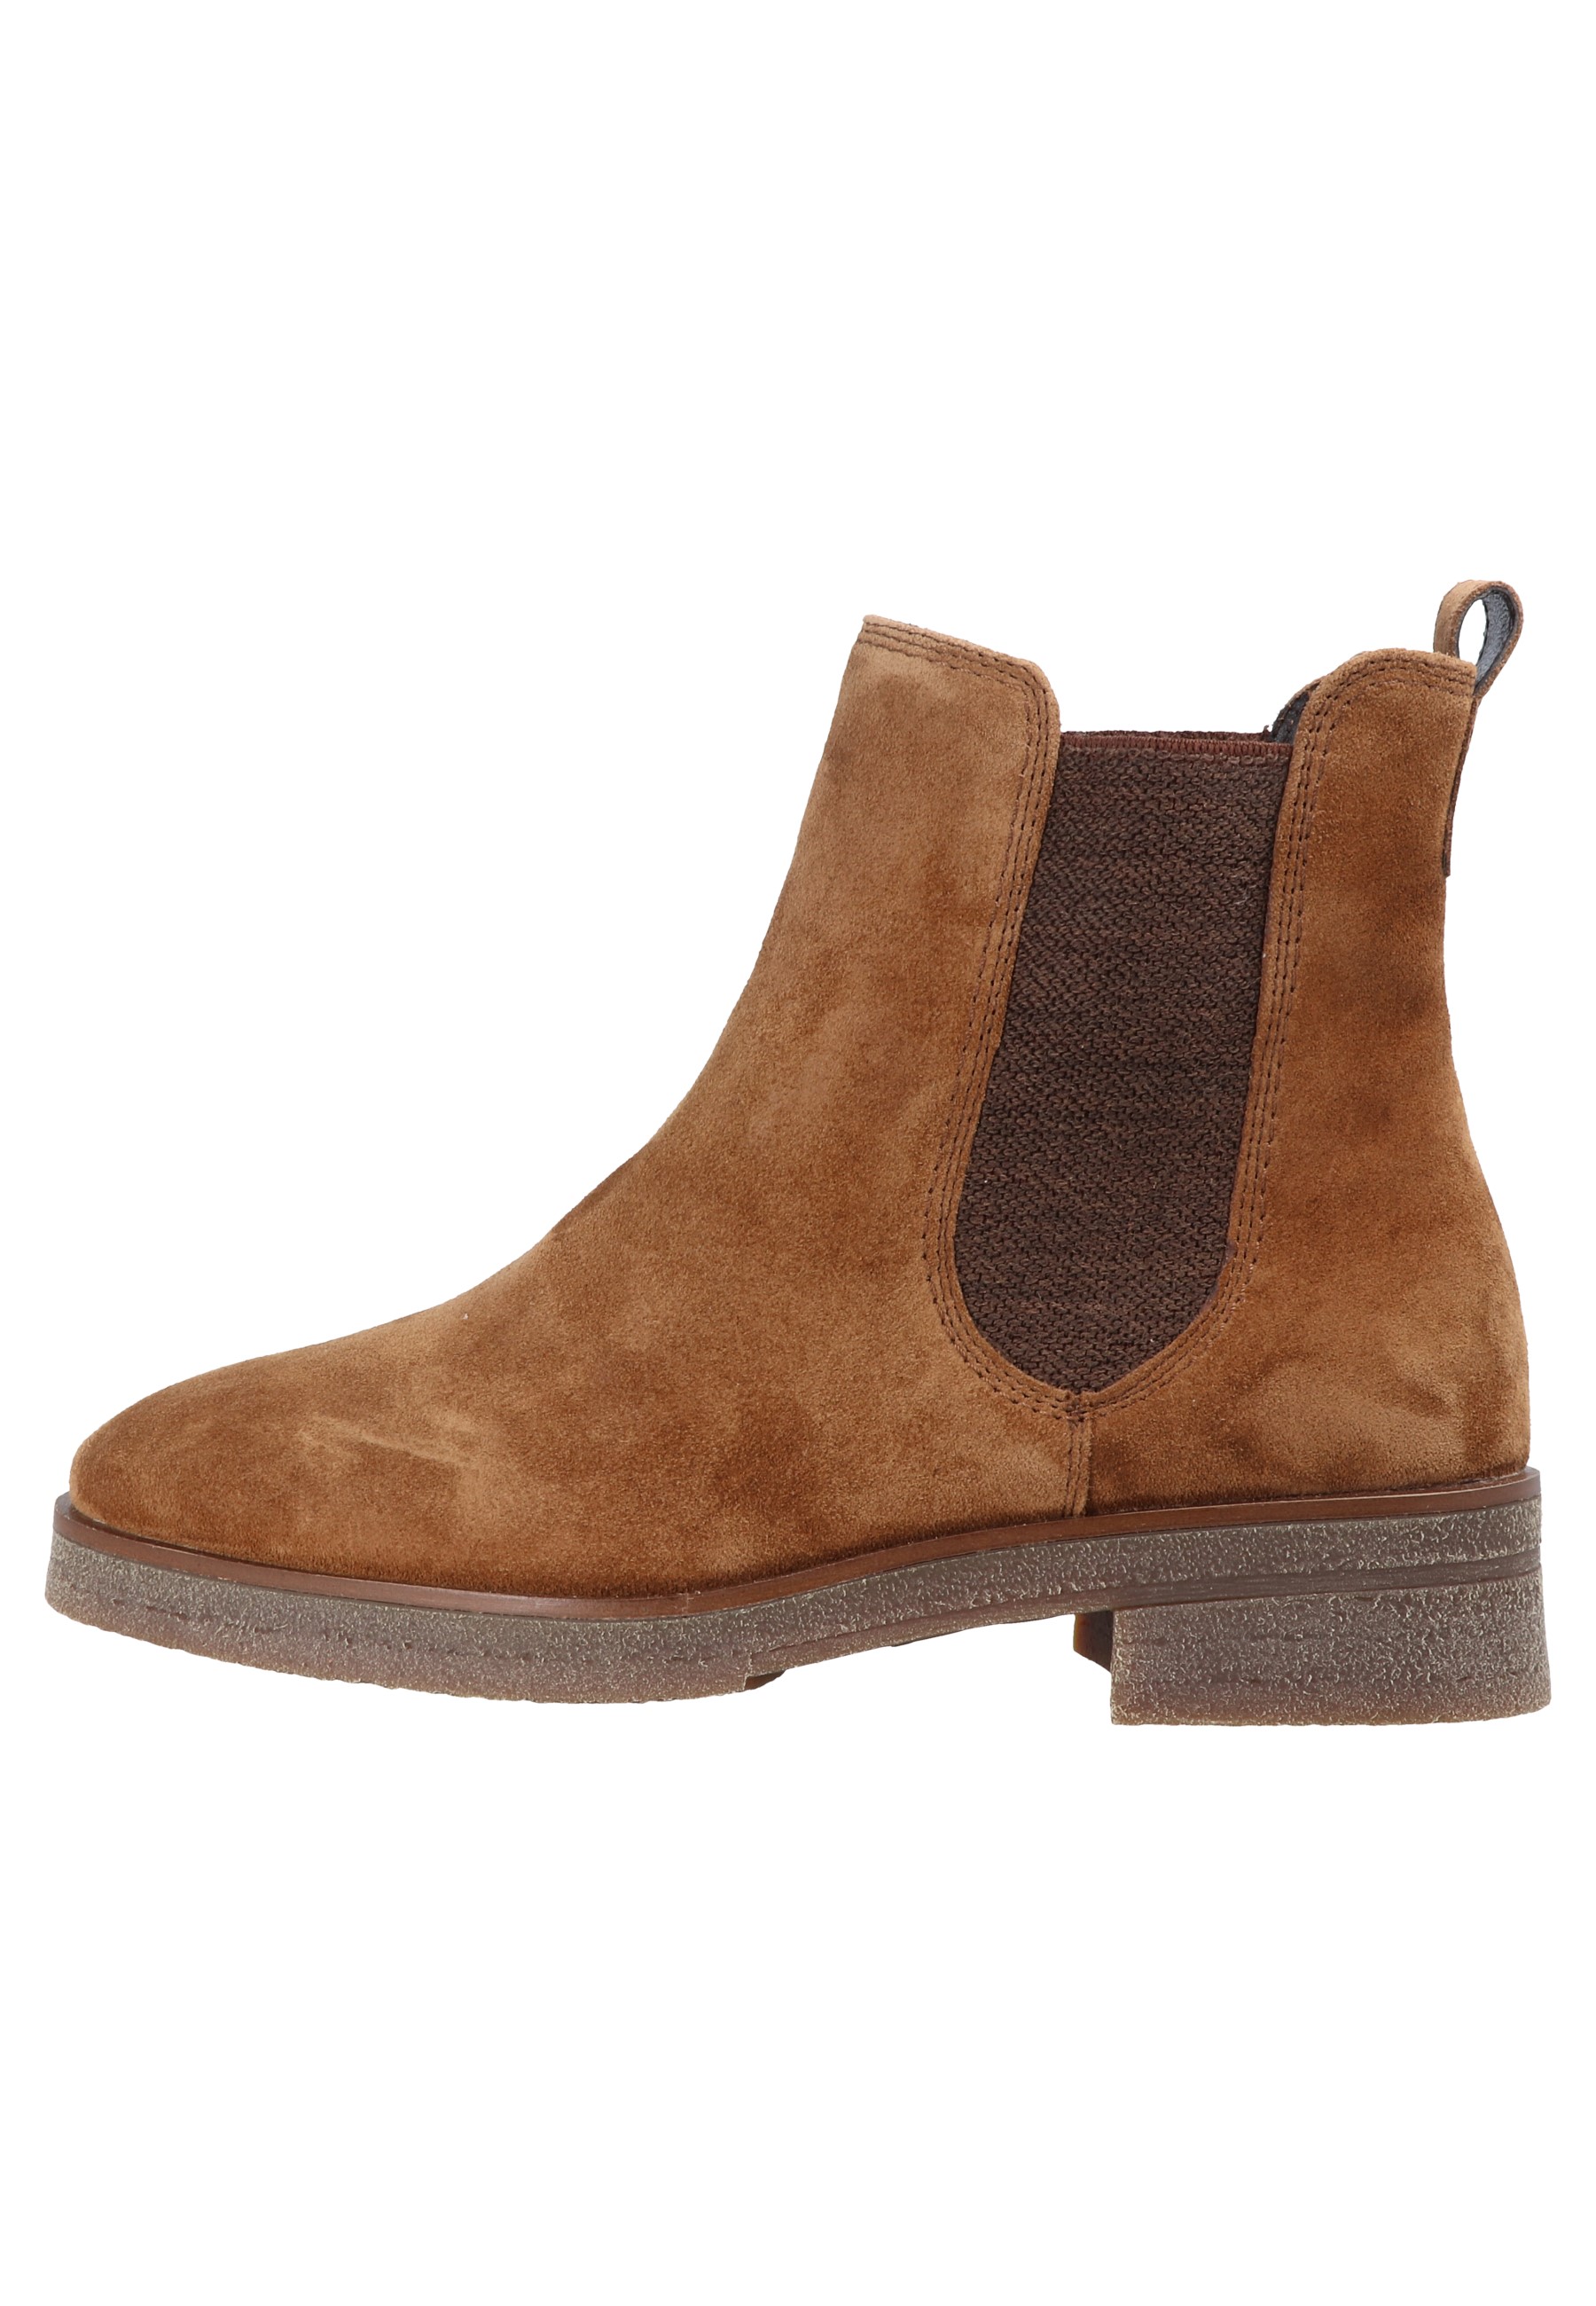 8021 SOFT SUEDE - Boots